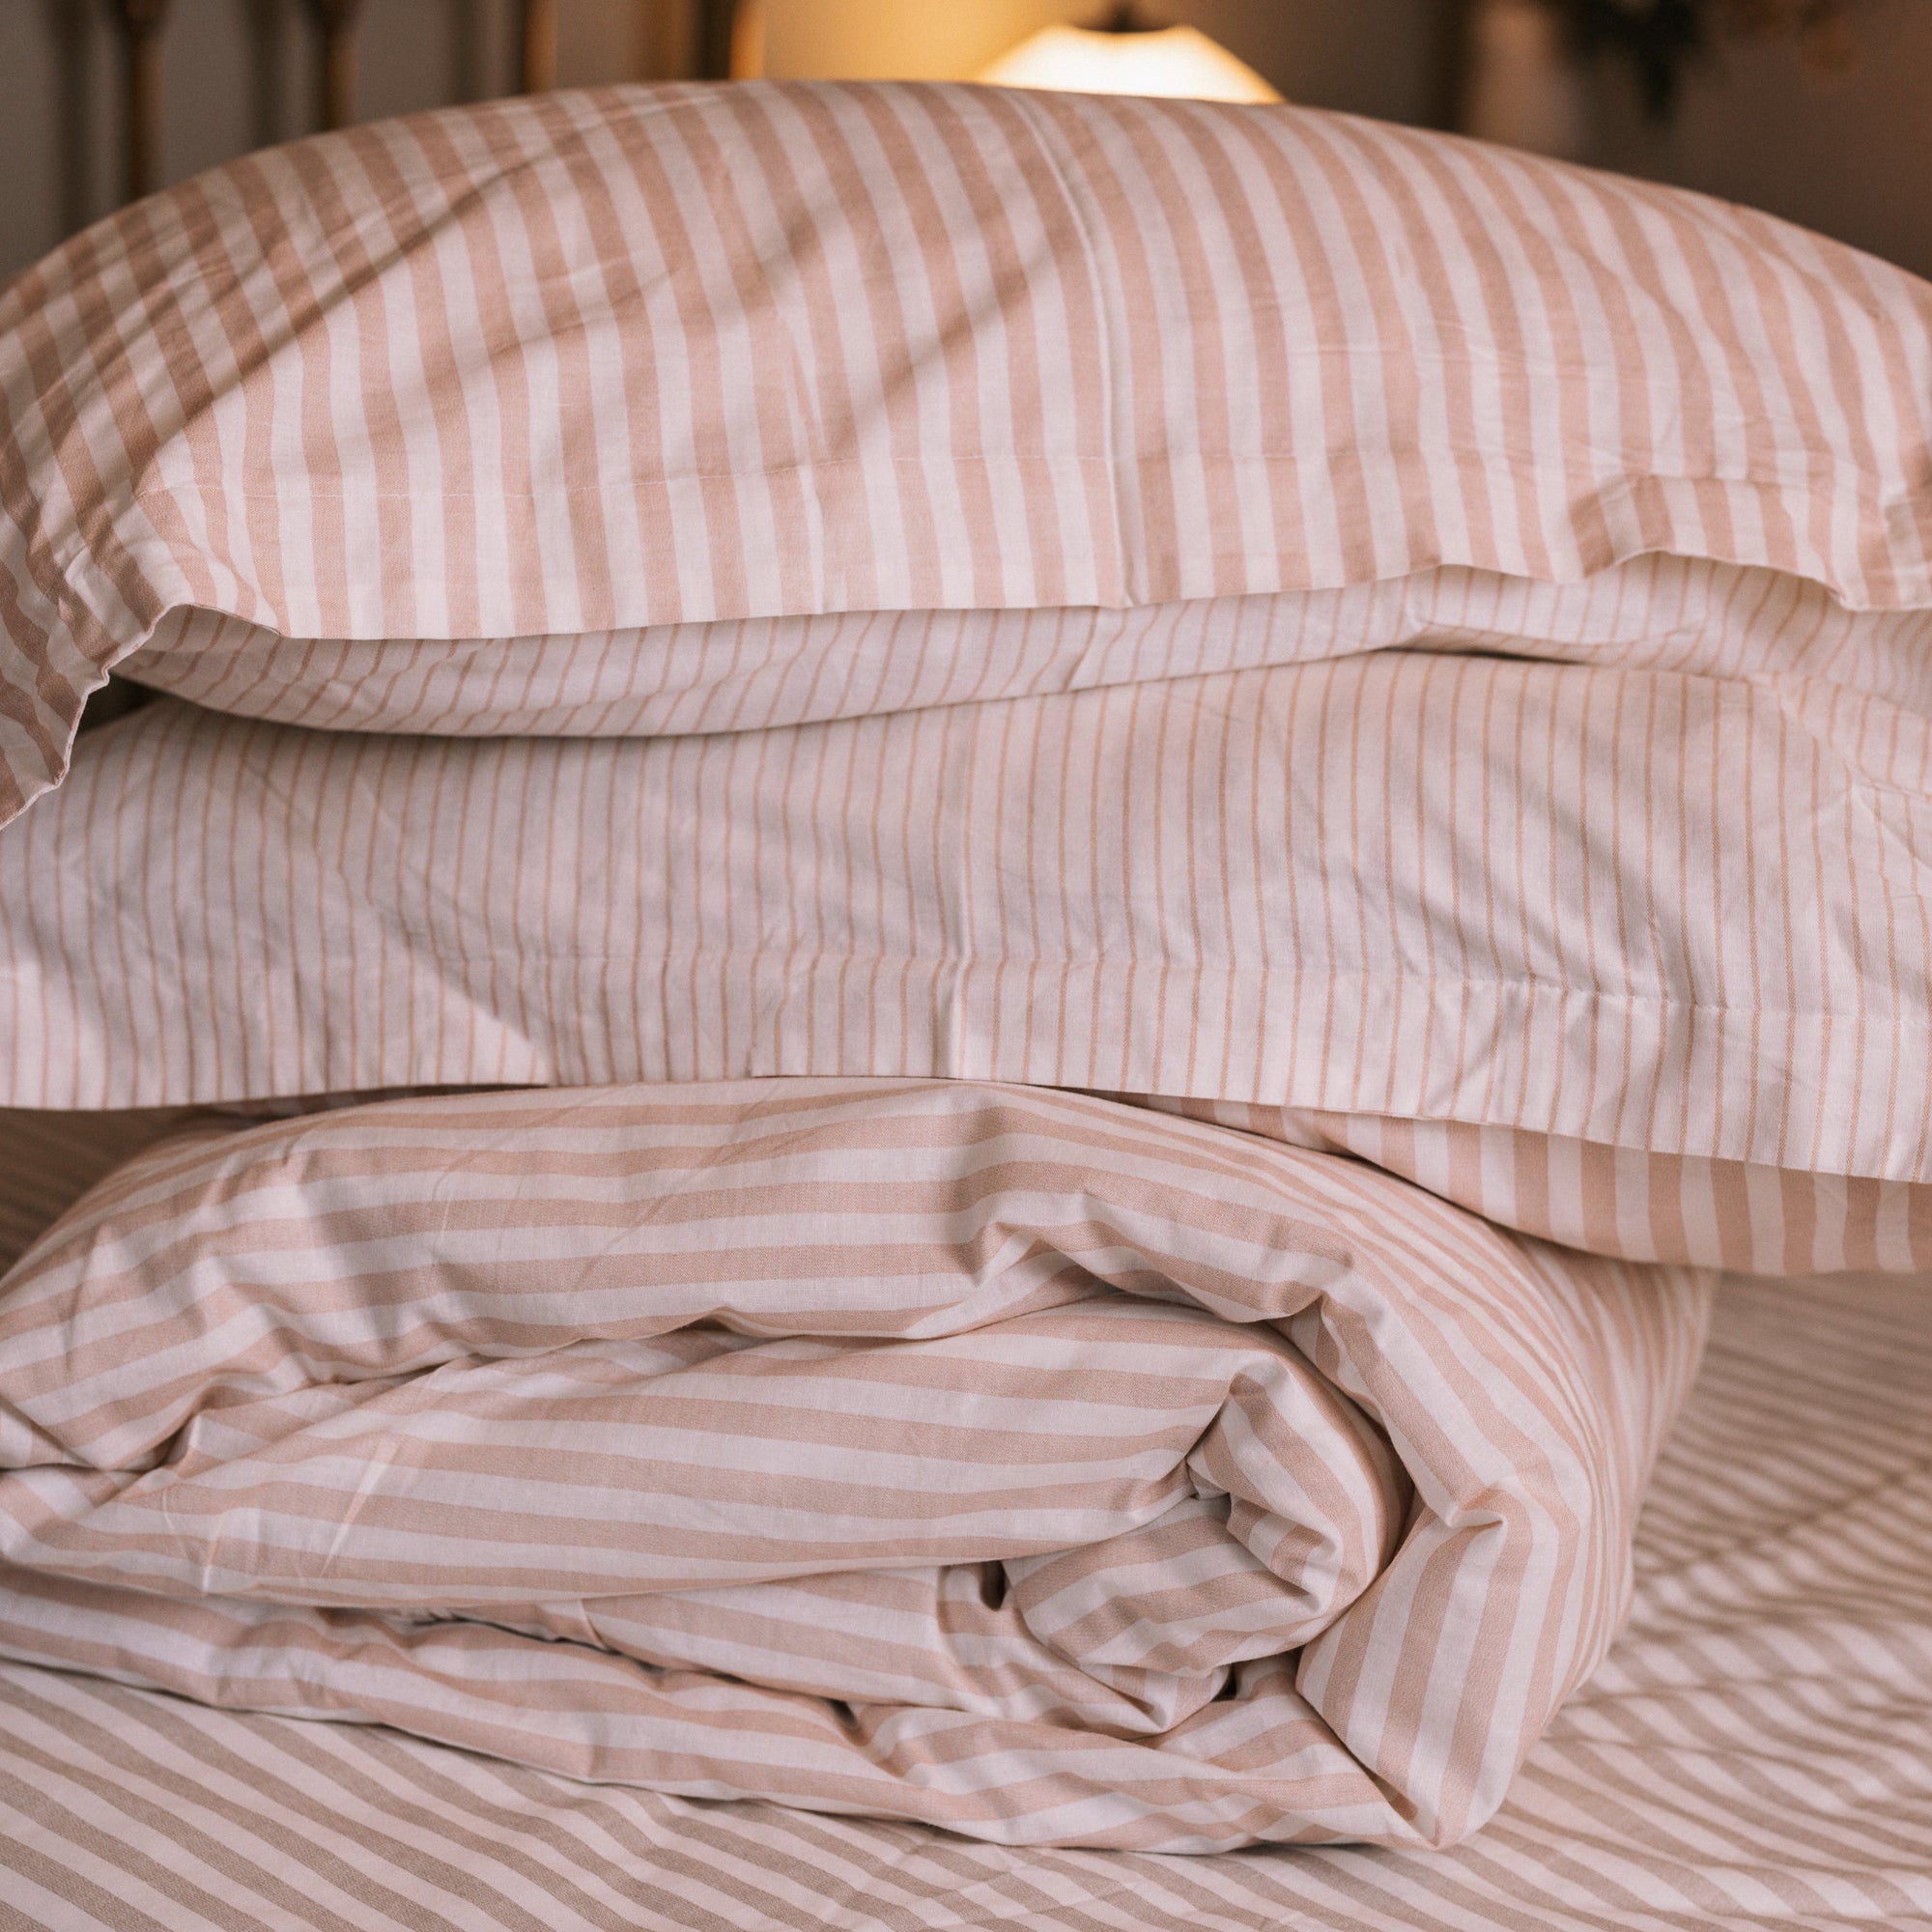 Blush pink striped bedding folded up in a neutral bedroom with a brass bed.